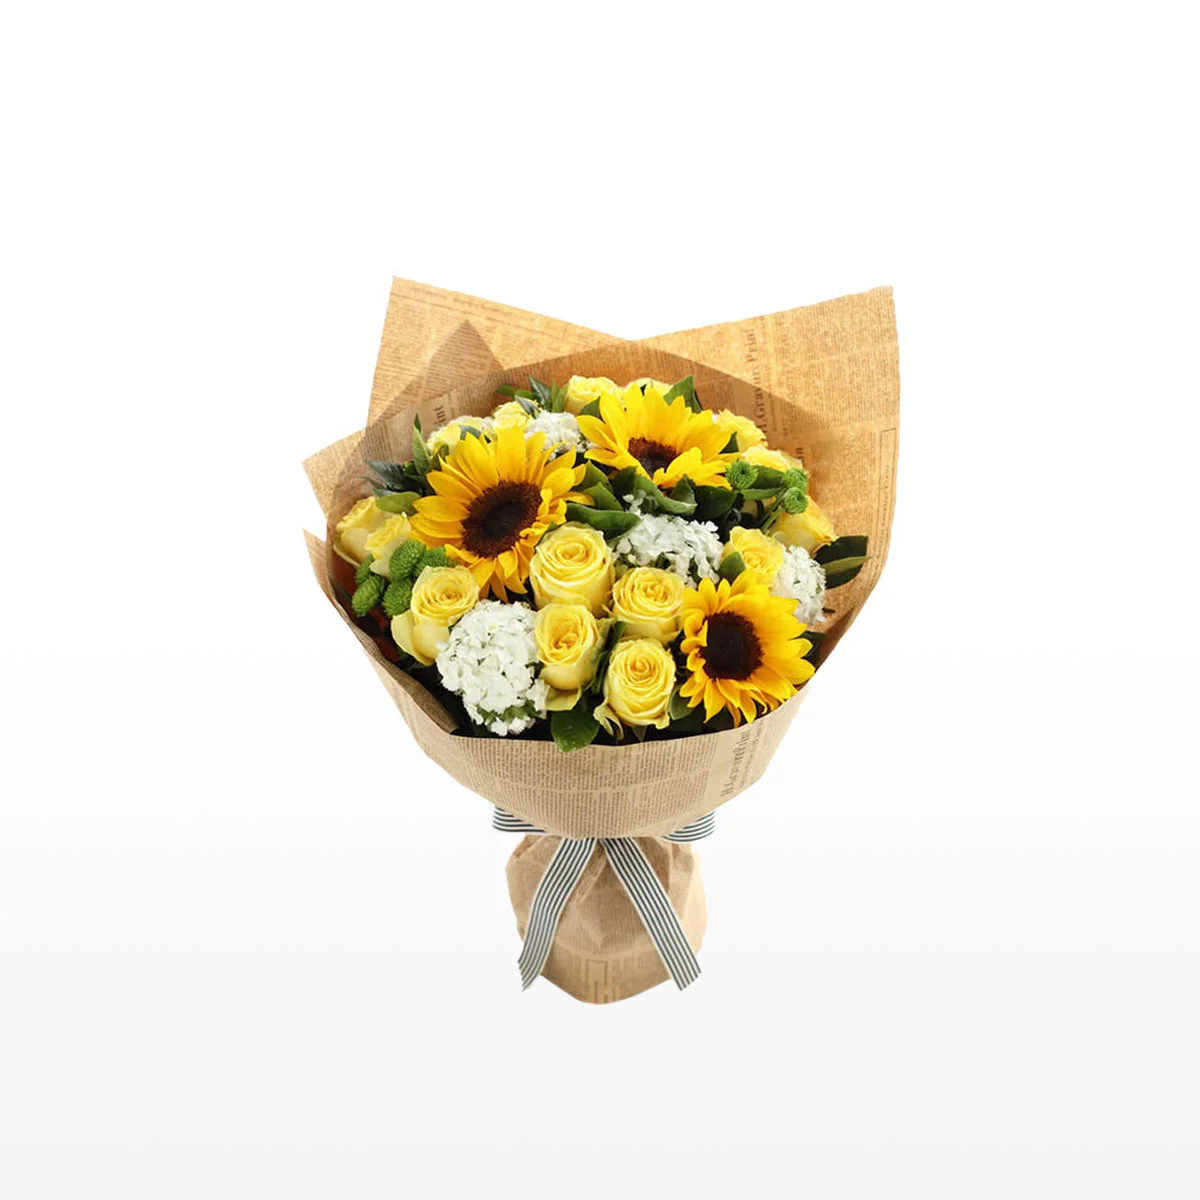 Medium bouquet of sunflowers, roses, daisies, dianthus and gardenia leaves wrapped in brown kraft paper